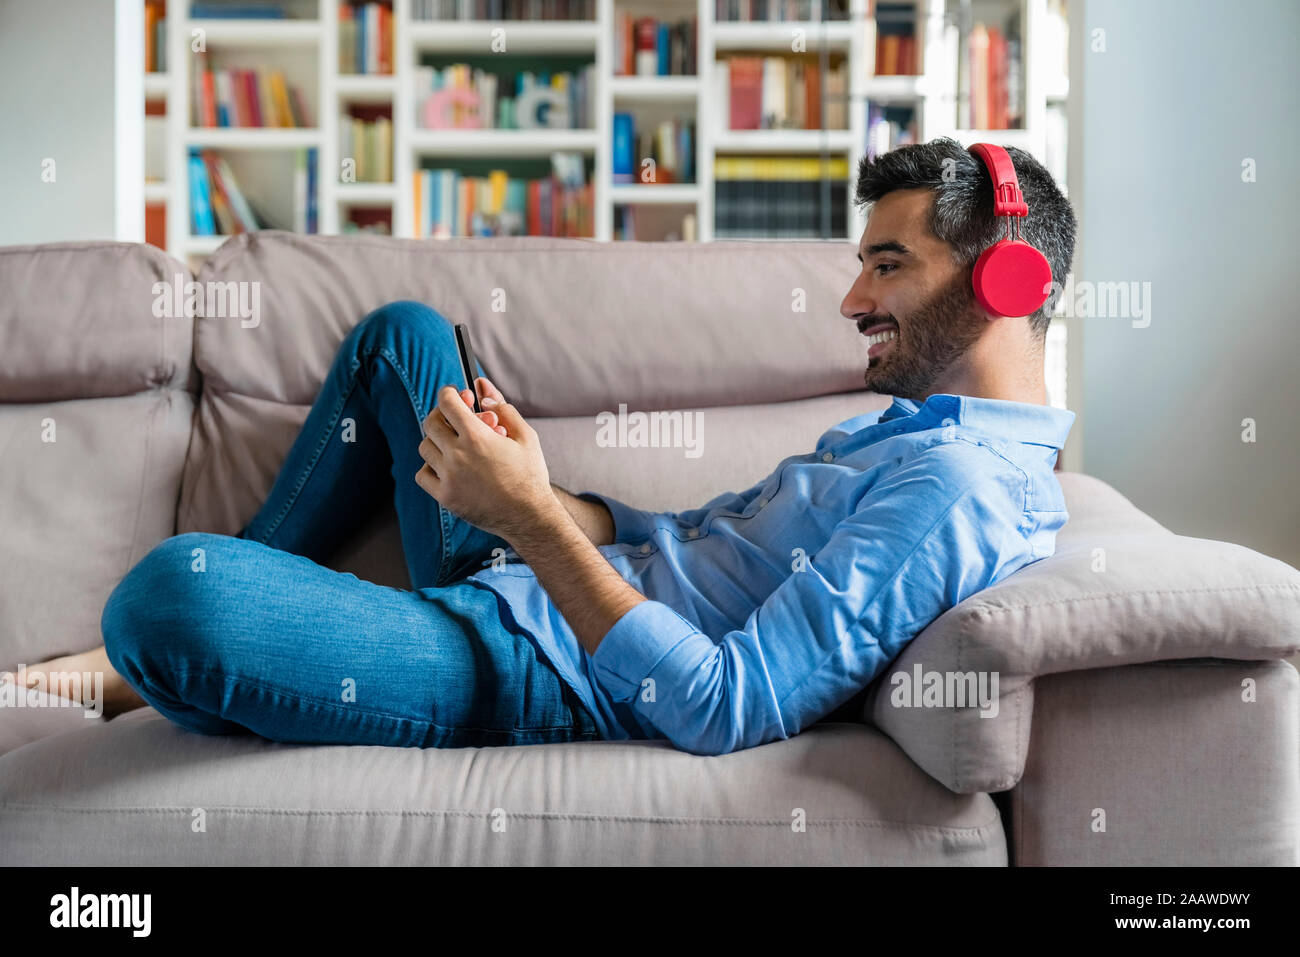 Smiling young man lying on the couch at home using smartphone and wireless headphones Stock Photo